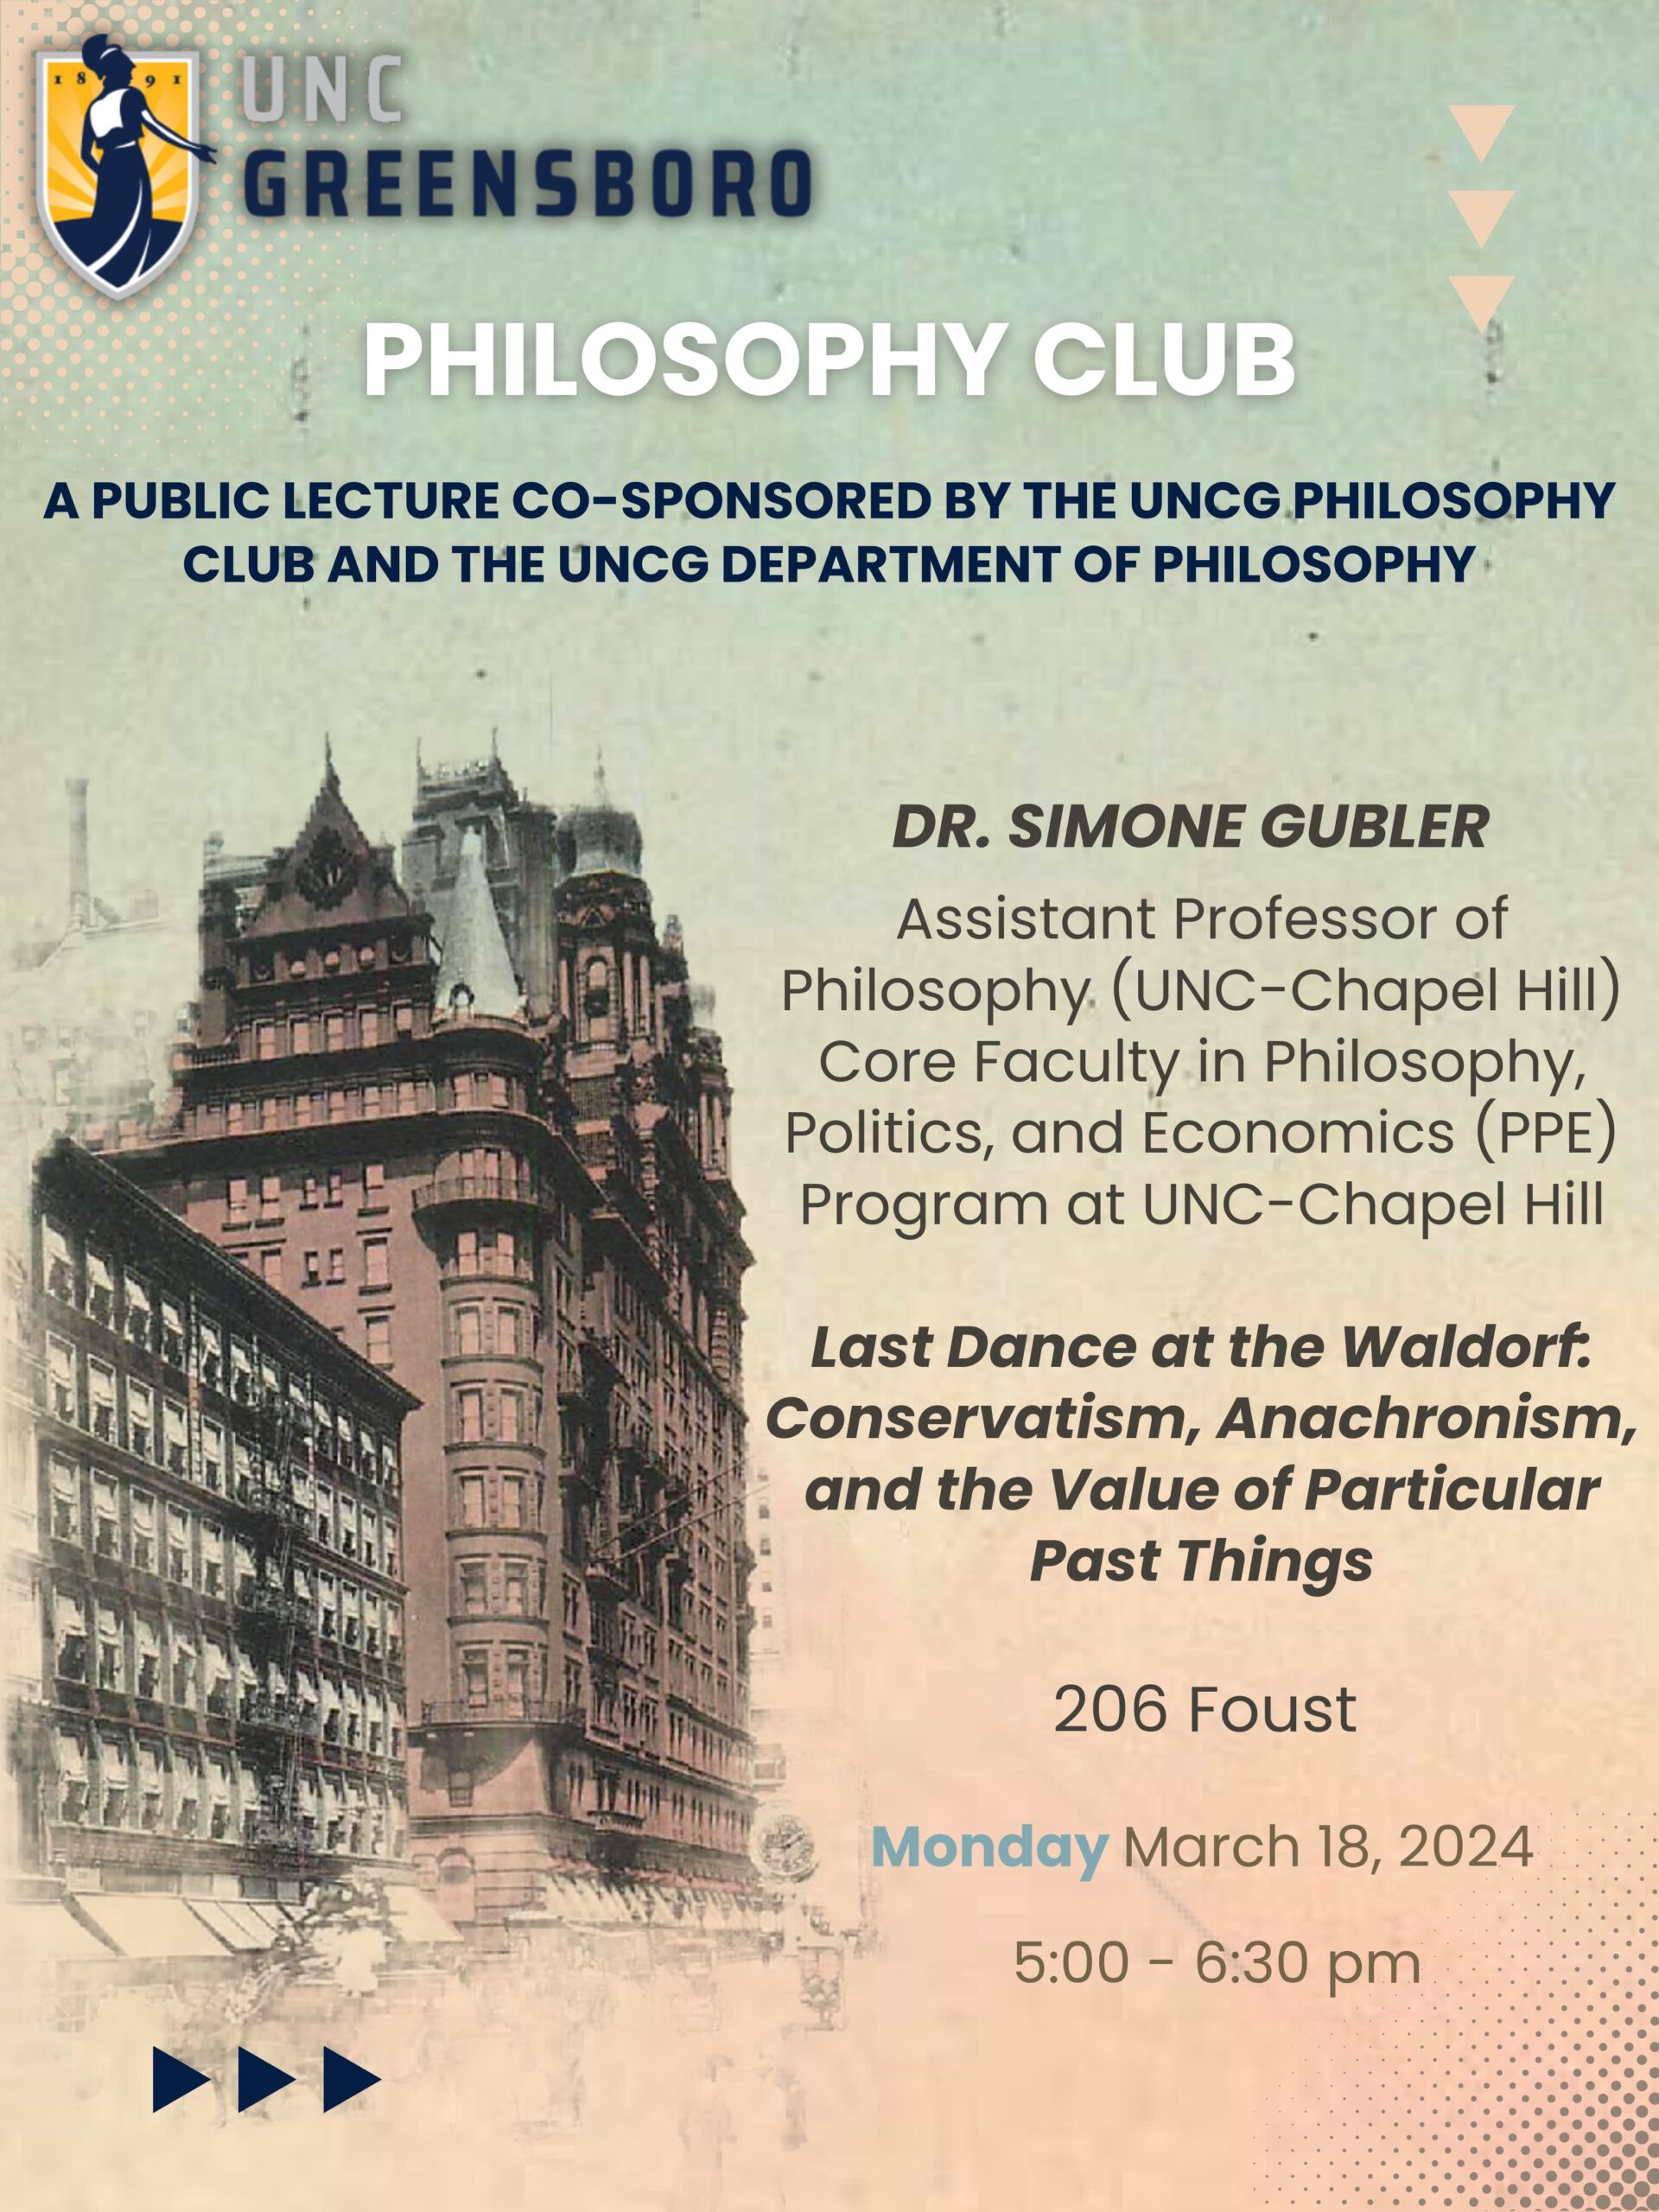 A public lecture co-sponsored by the Philosophy Department Dr. Simone Gubler Assistant Professor of Philosophy (UNC Chapel Hill), Core Faculty in Philosophy, Politics, and Economics (PPE) at UNC Chapel Hill "Last Dance at the Waldorf: Conservatism, Anachronism, and the Value of Particular Past Things." 206 Foust Monday, March 18, 2024 5:00-6:30pm